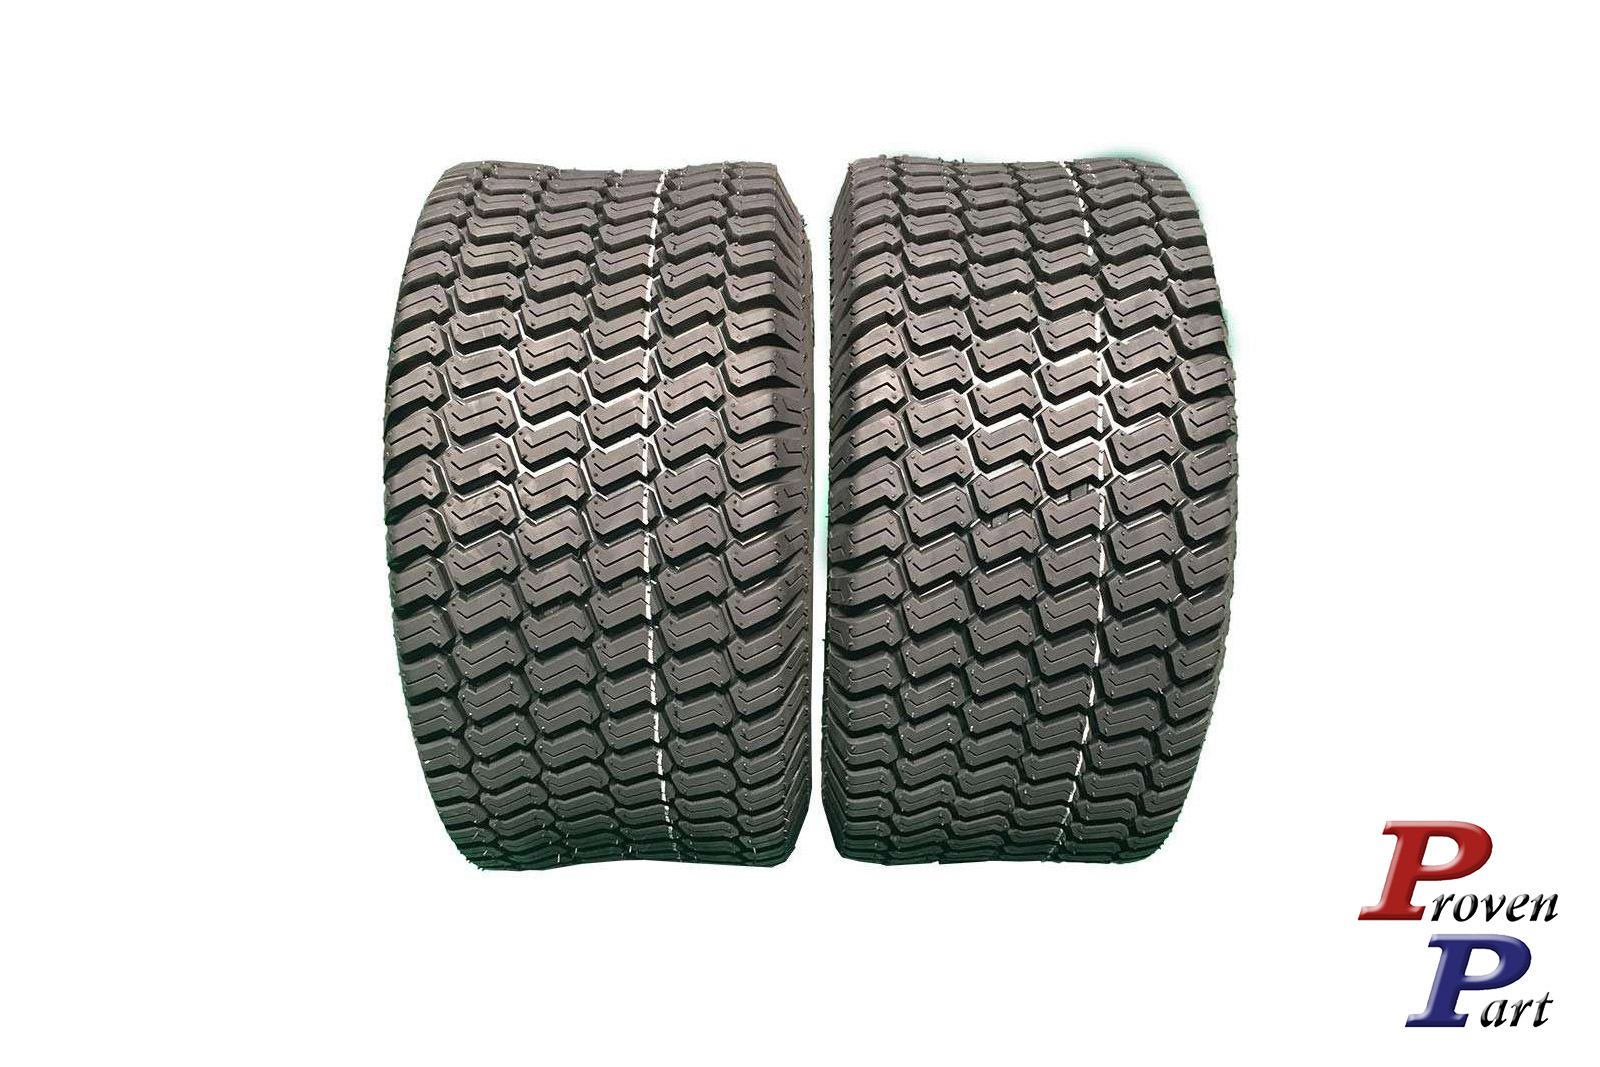 Set of 2 lawn mower 23X8.5-12 ProMaster tubeless 4 ply tires